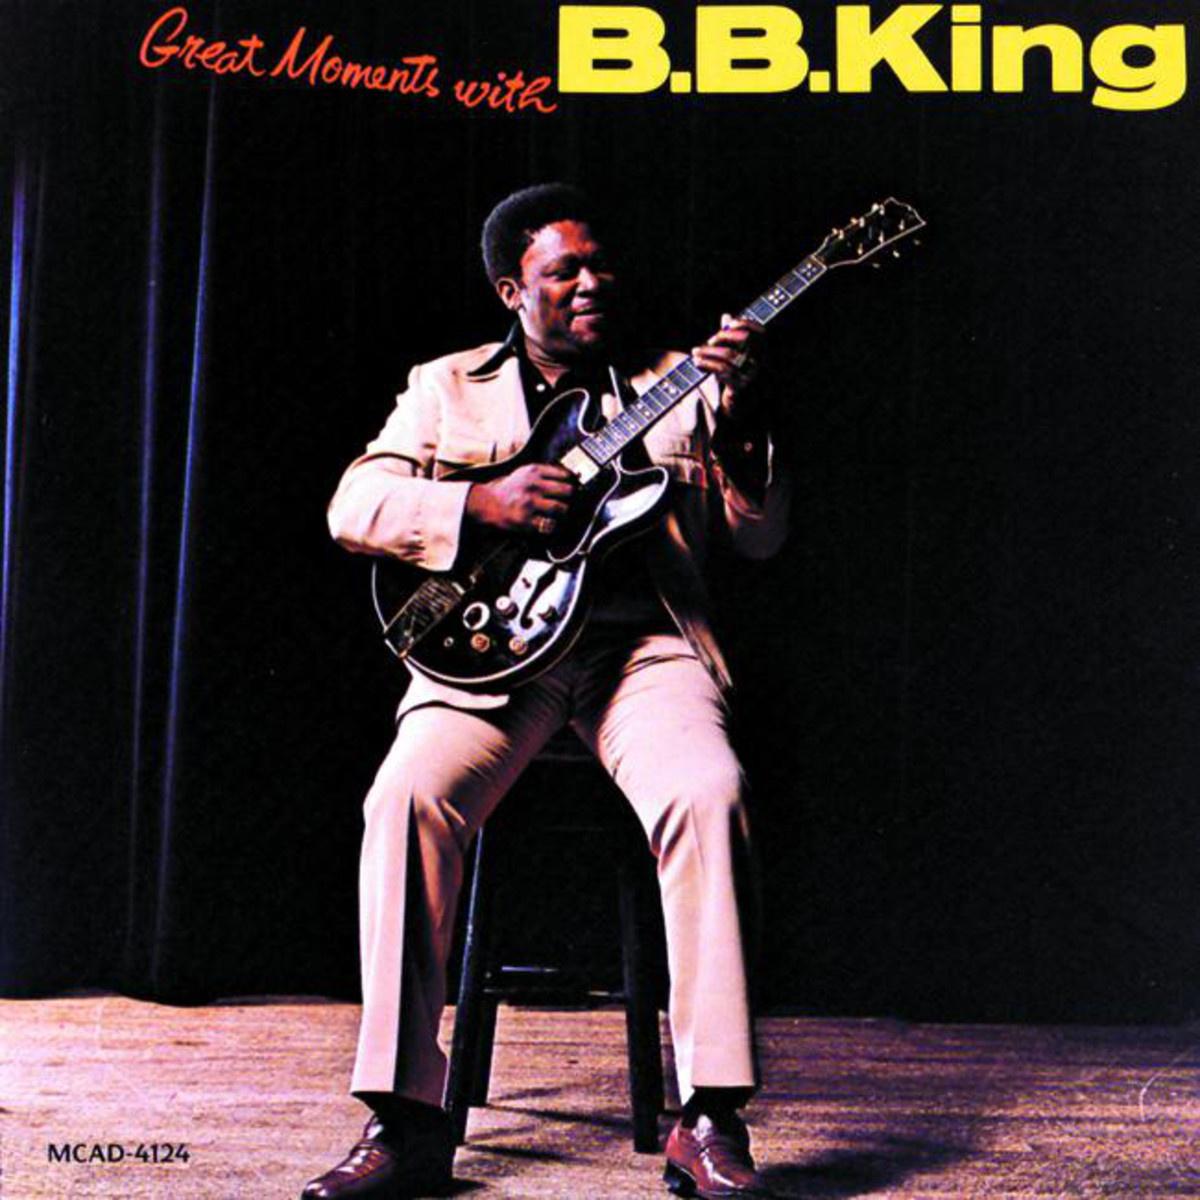 Great Moments with B.B. King专辑